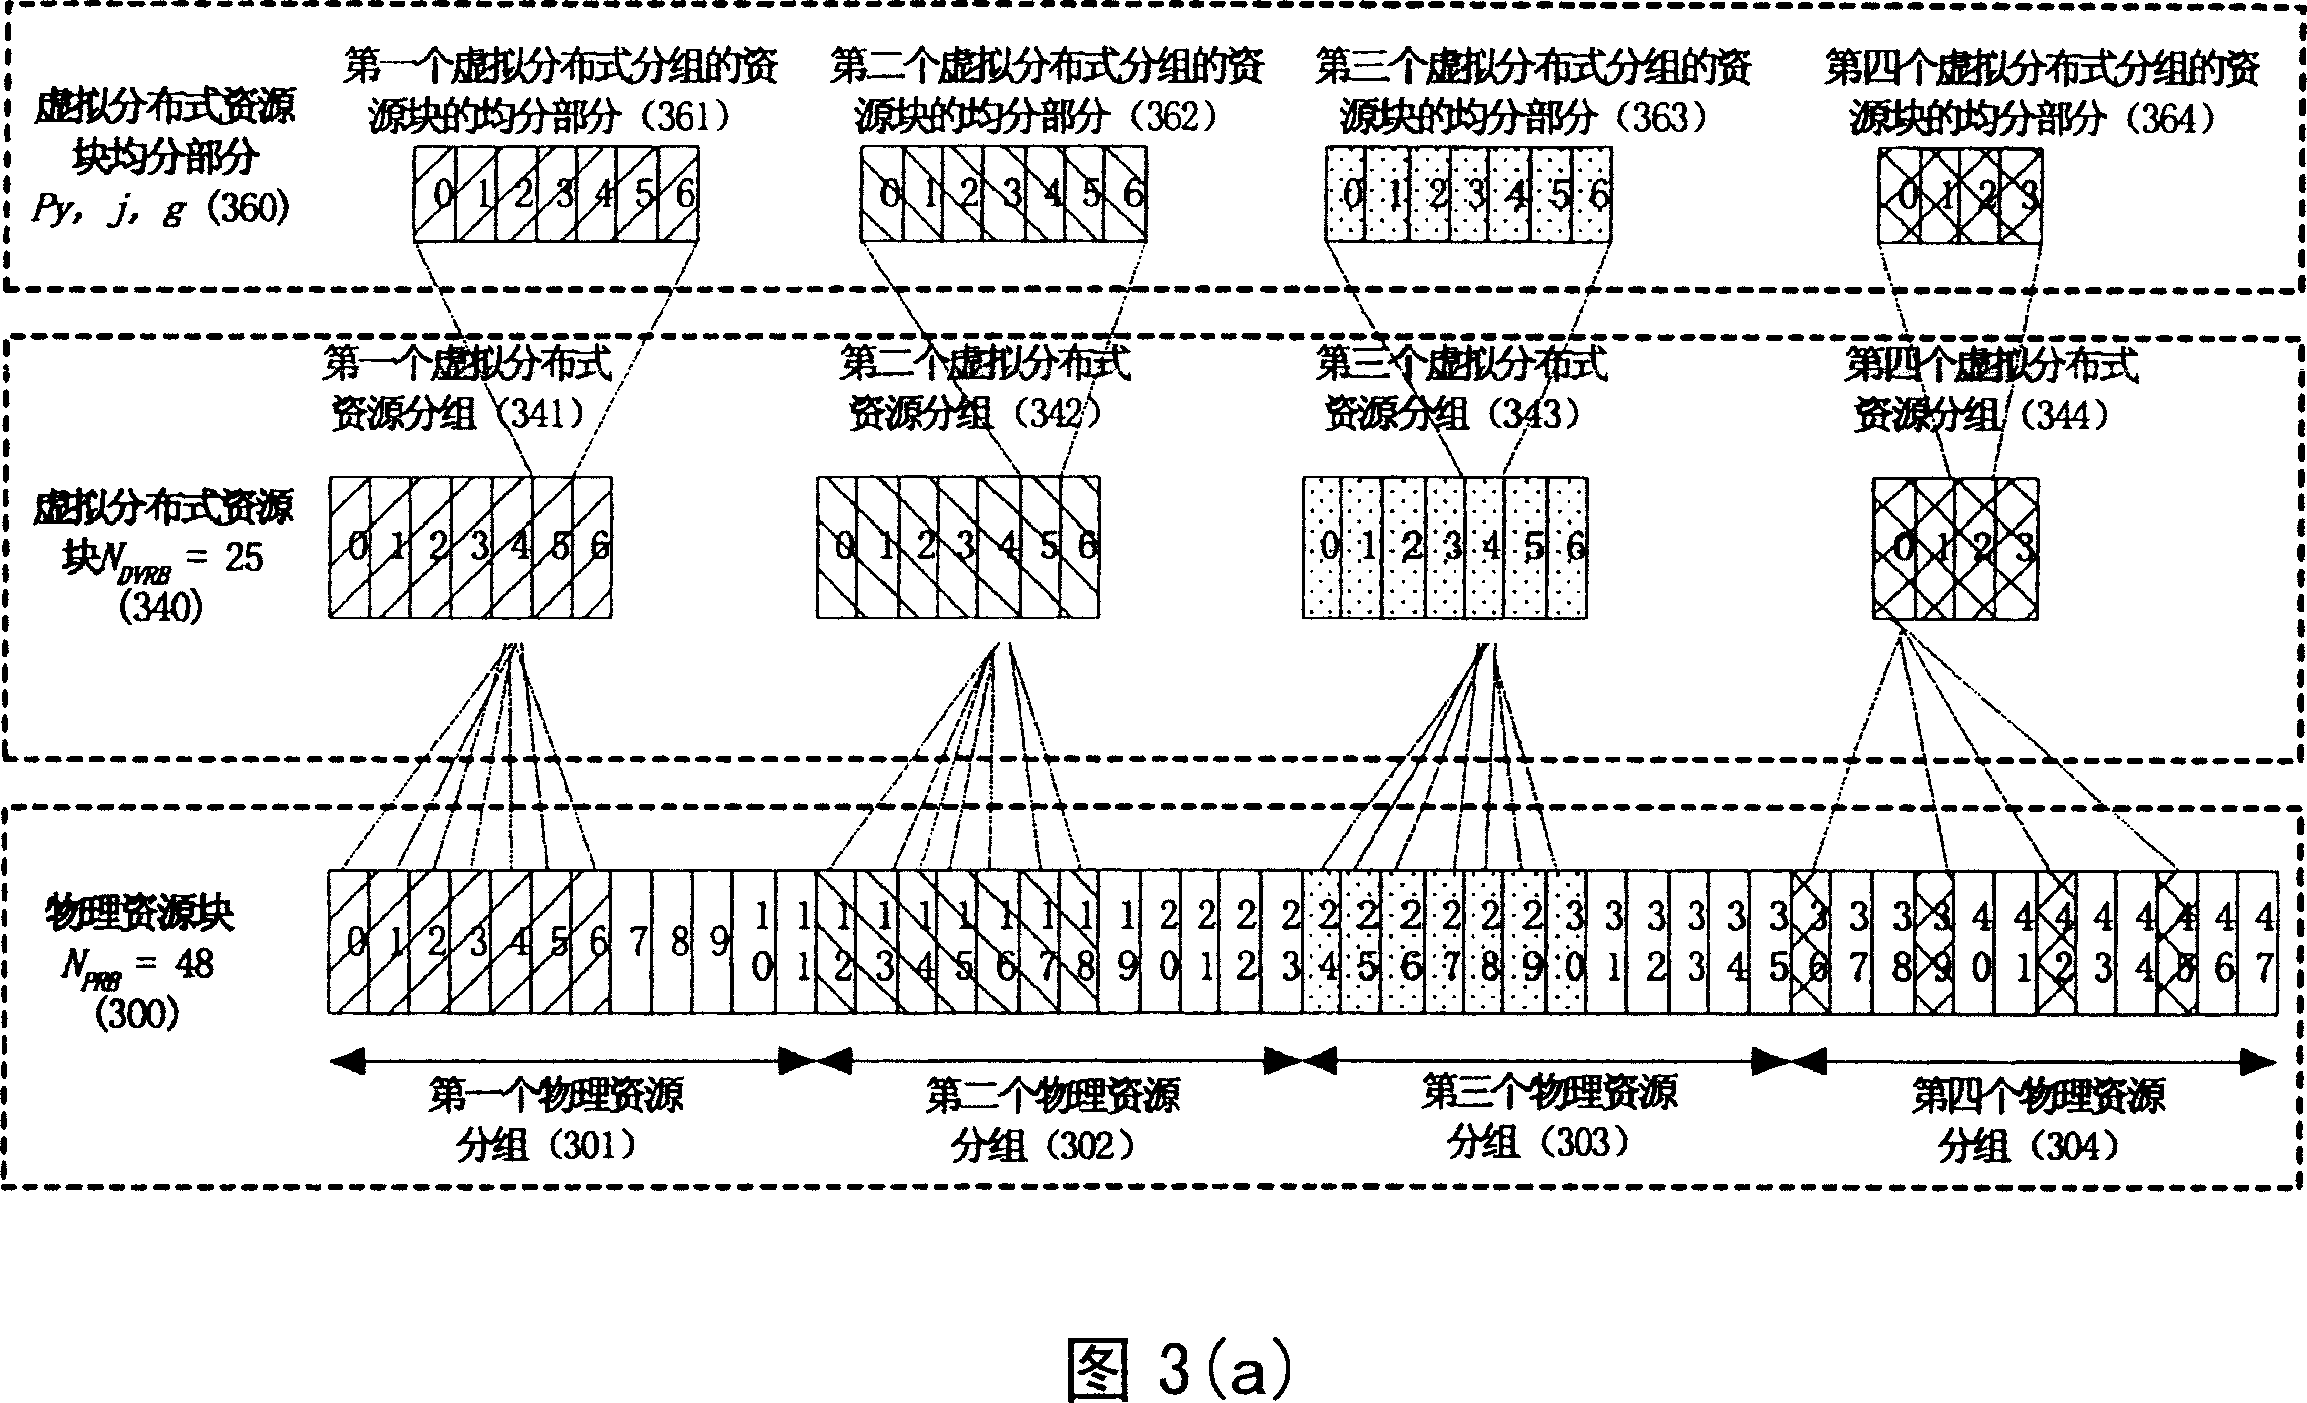 Resource allocation and control signaling transmission method